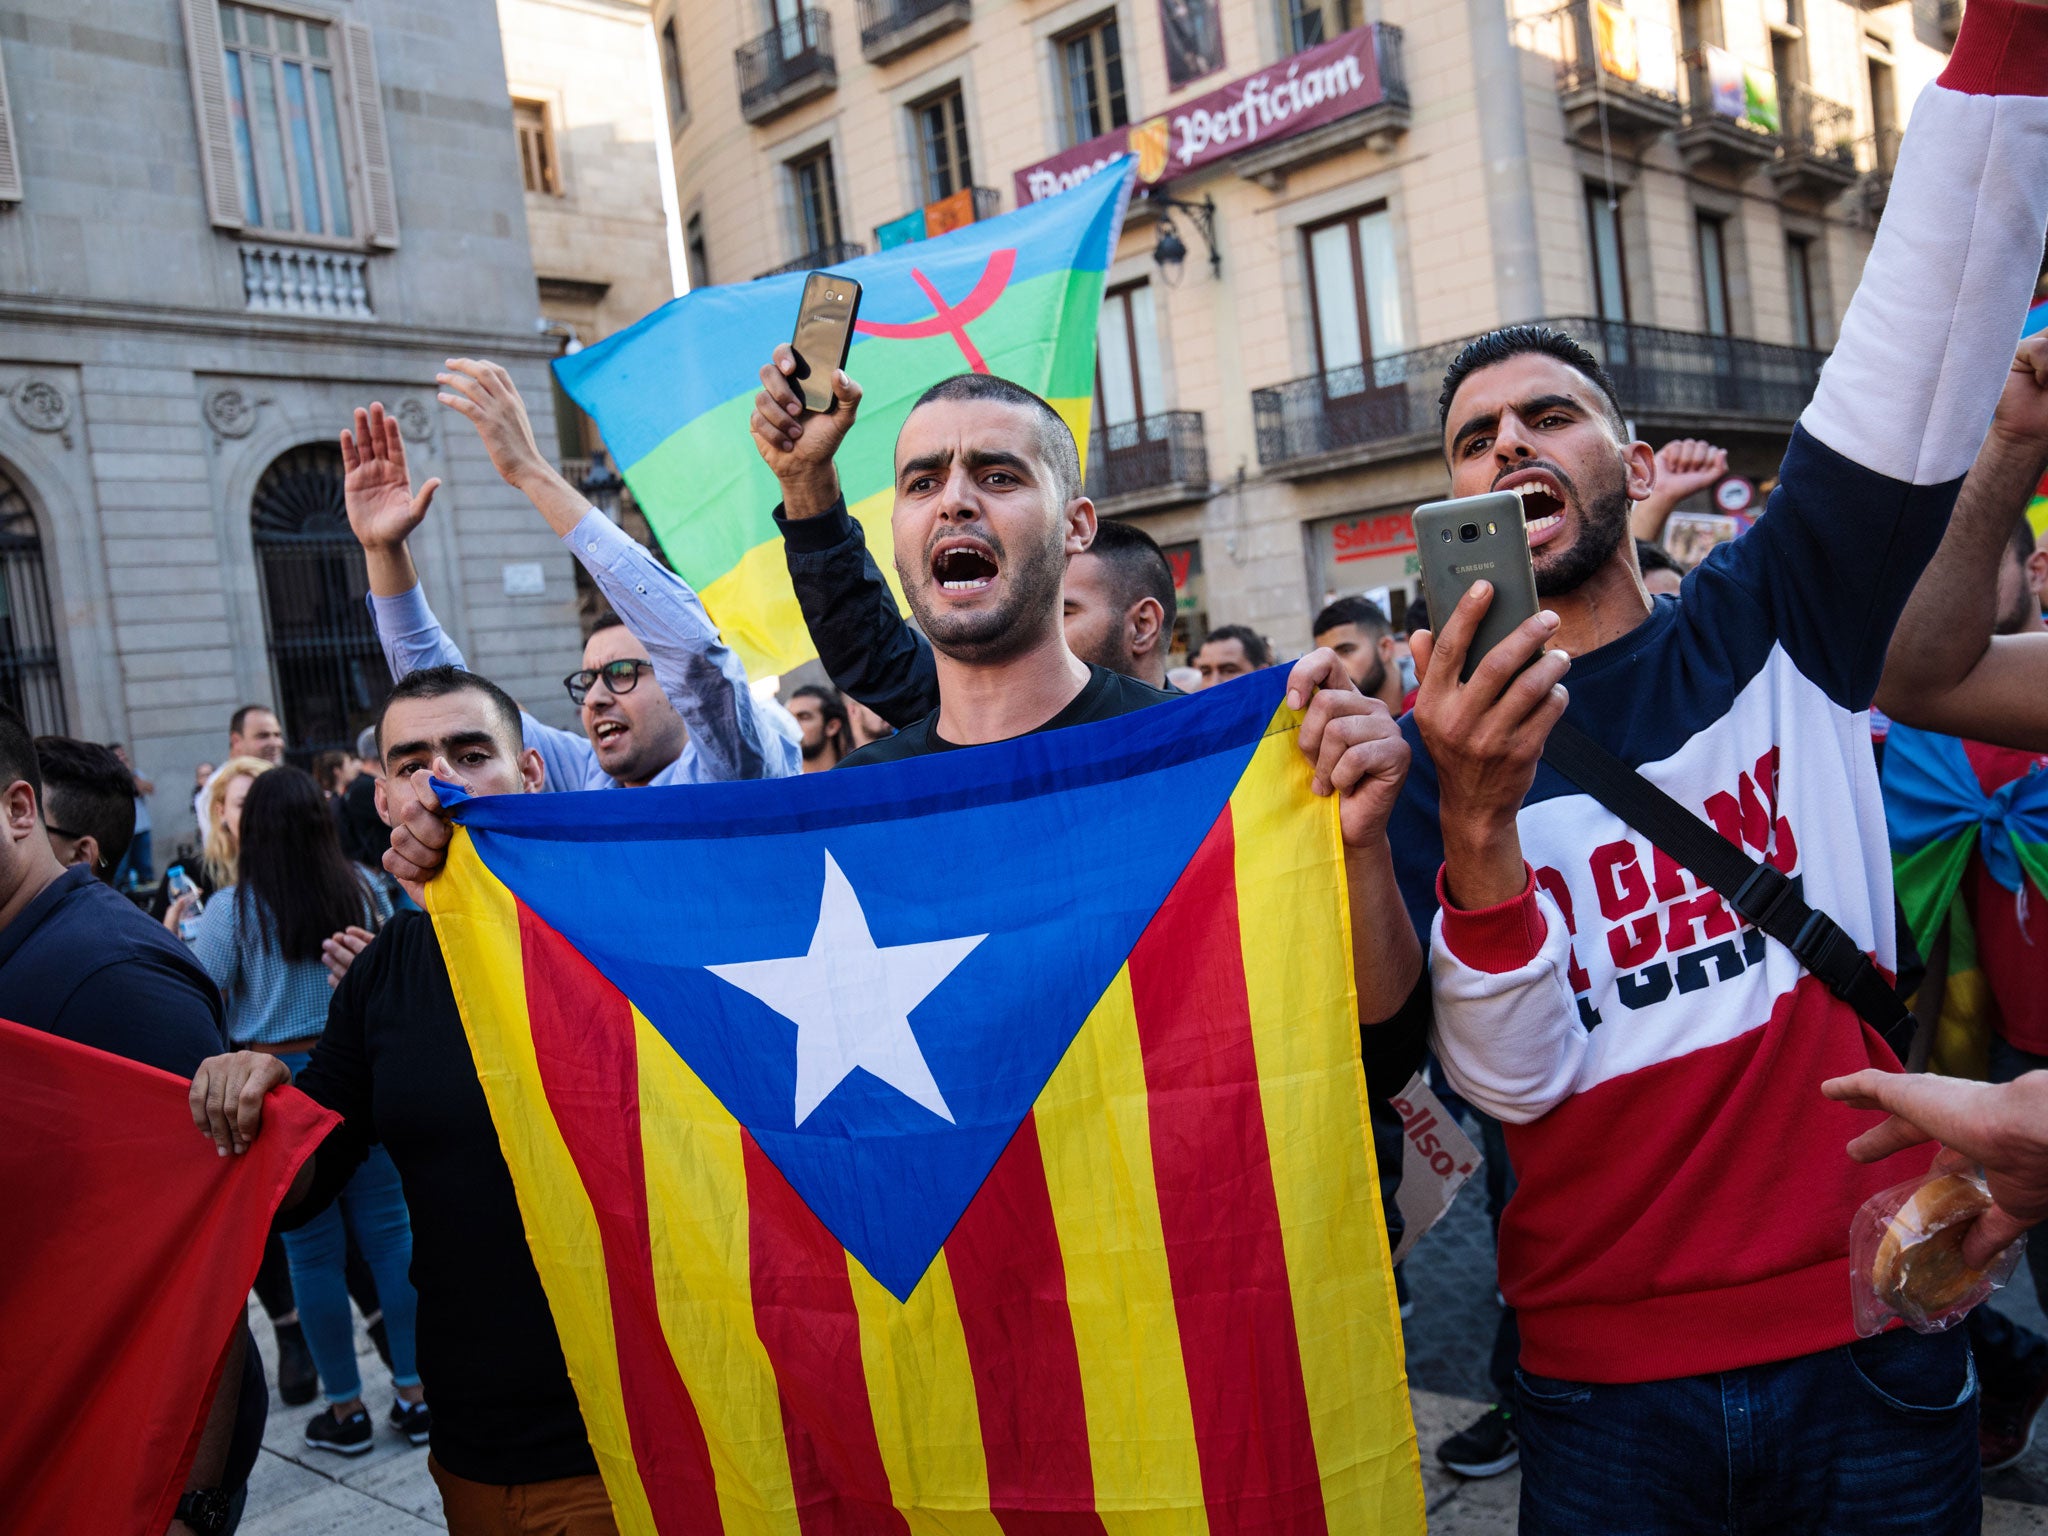 Catalan nationalists call for resistance as Madrid asserts control